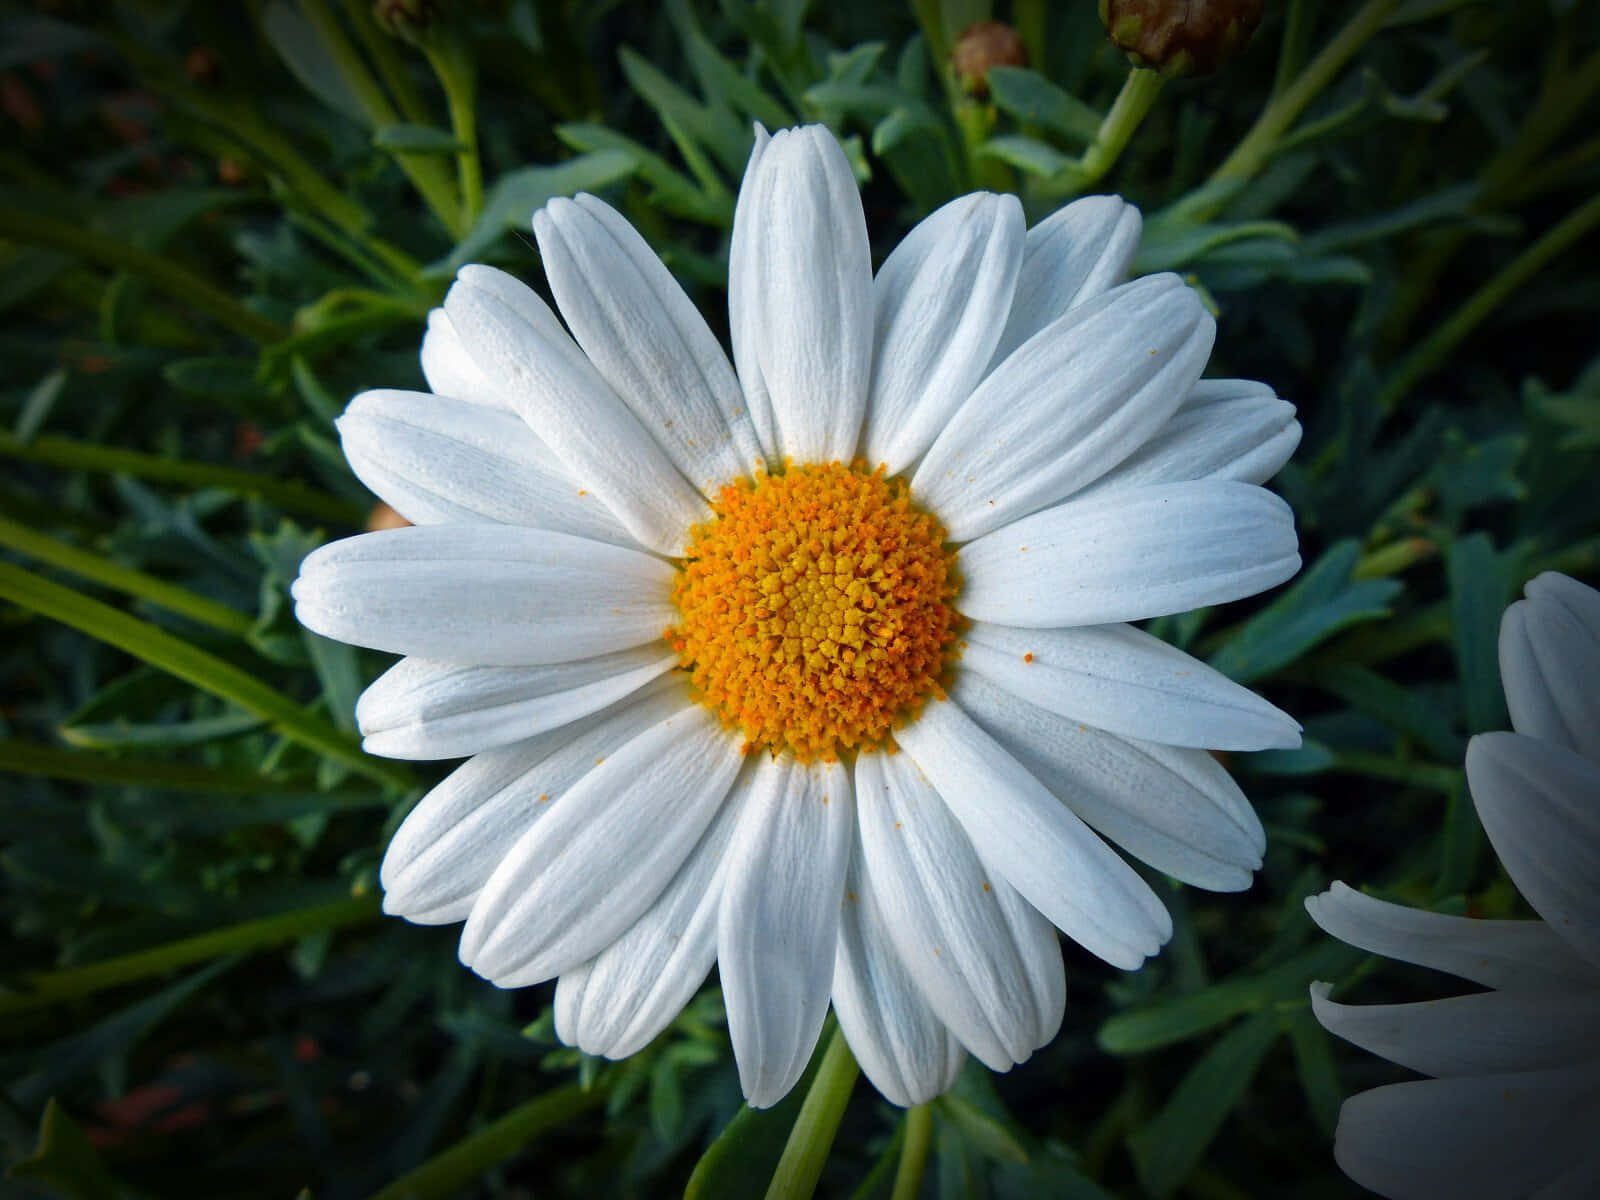 Exceptional Daisy Flower Picture